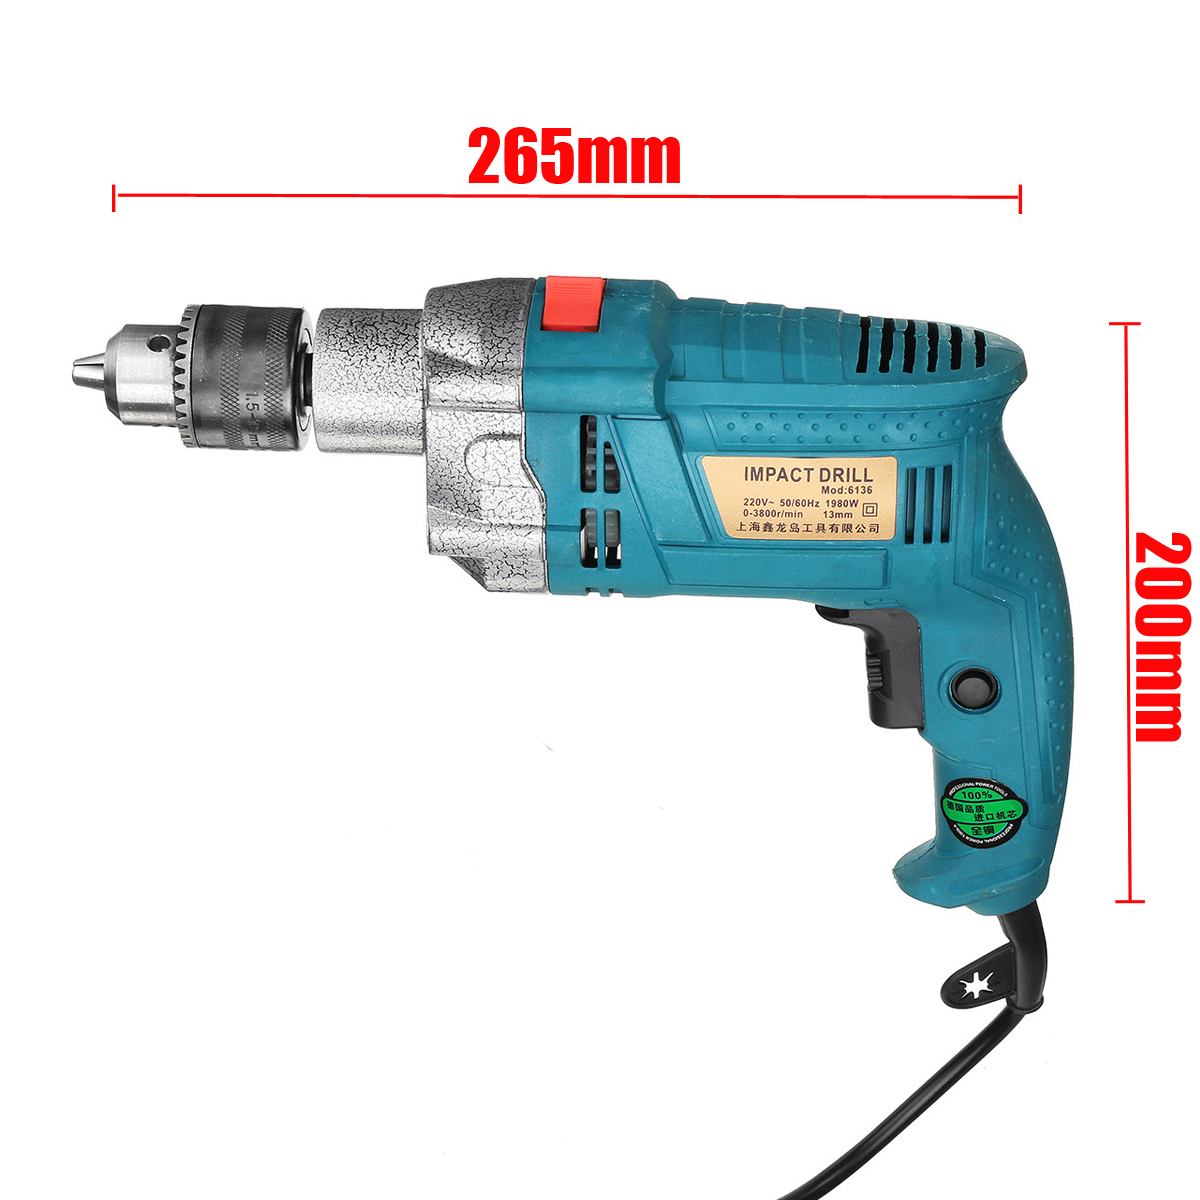 1980W-3800rpm-Electric-Impact-Drill-360deg-Rotary-Skid-Proof-Handle-With-Depth-Measuring-Scale-Spina-1715301-2